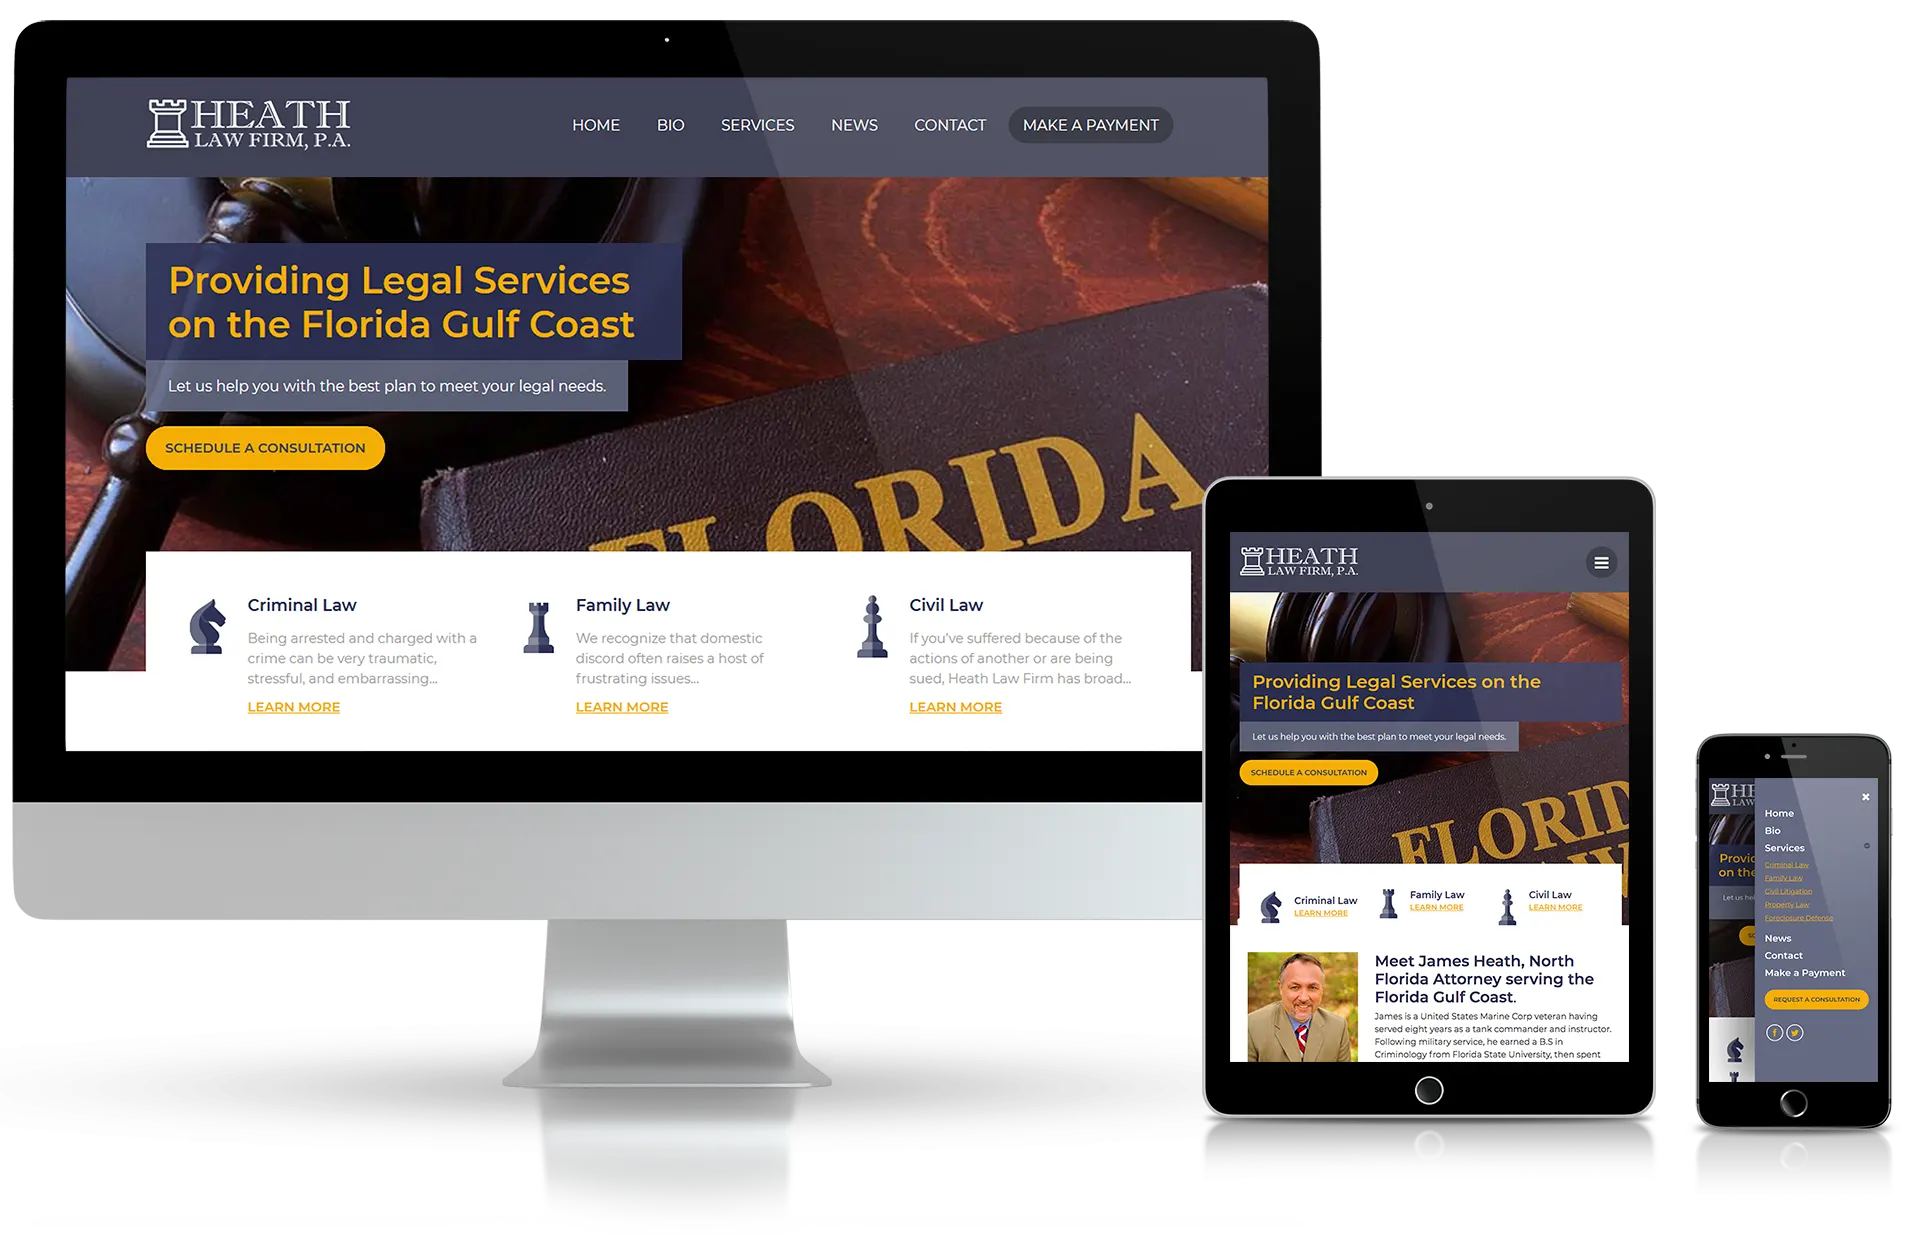 Website design for Heath Law Firm